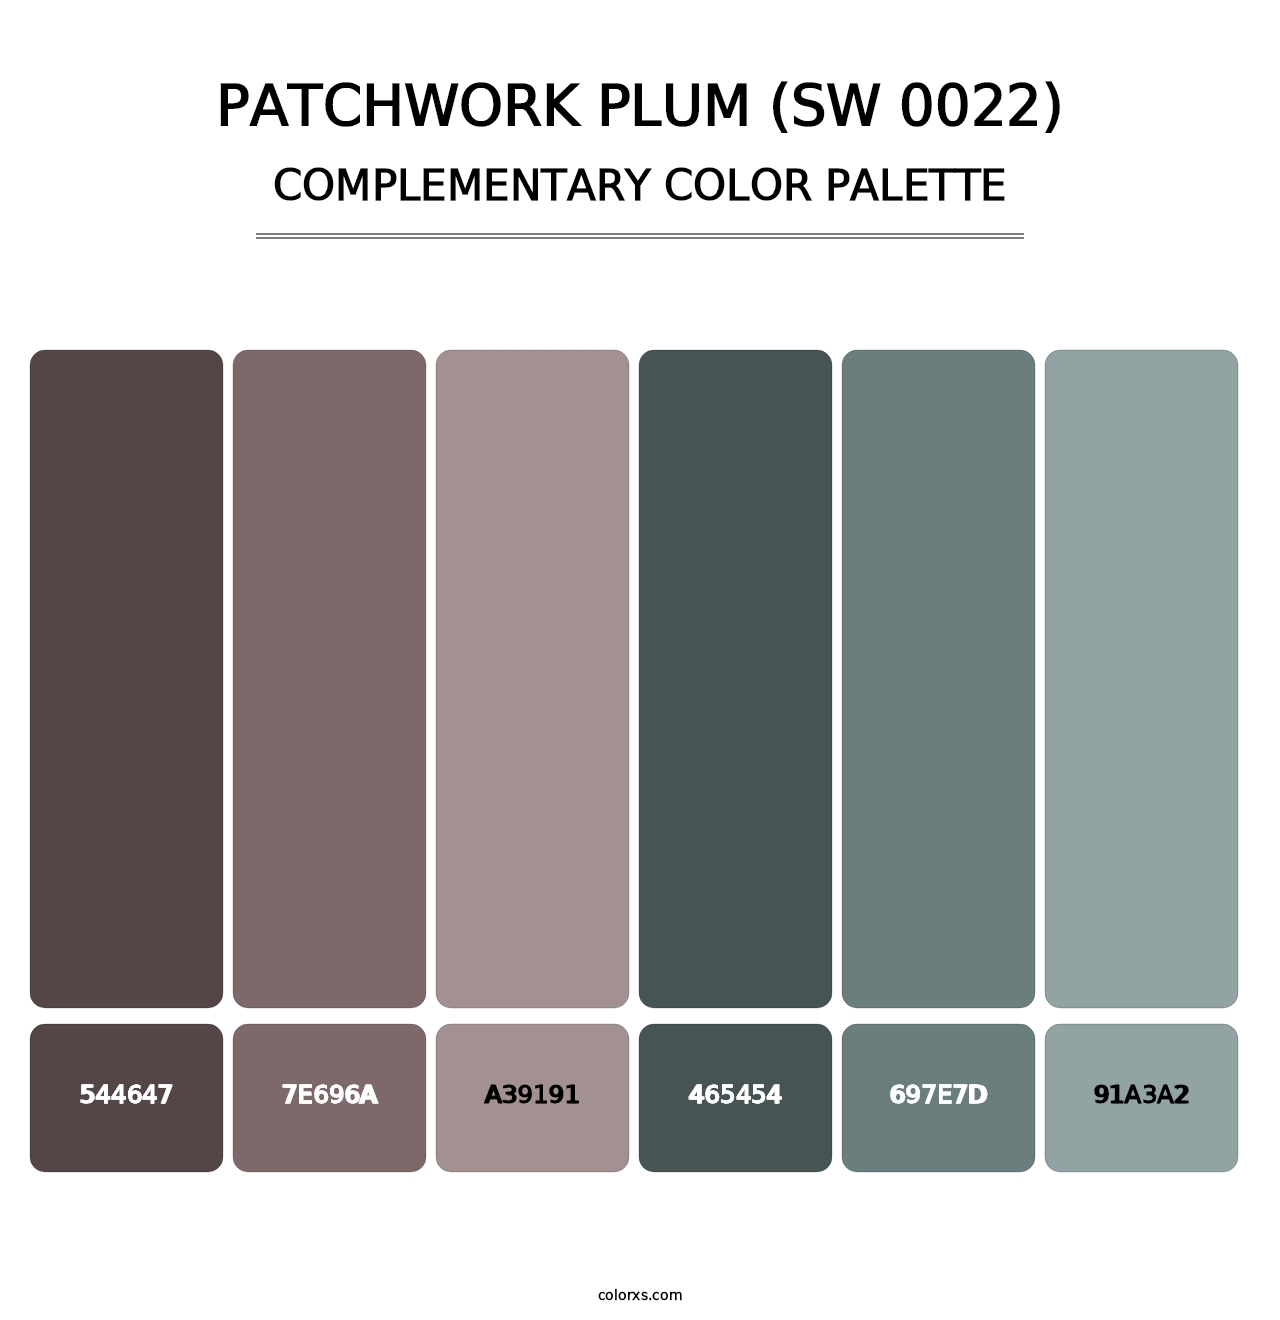 Patchwork Plum (SW 0022) - Complementary Color Palette